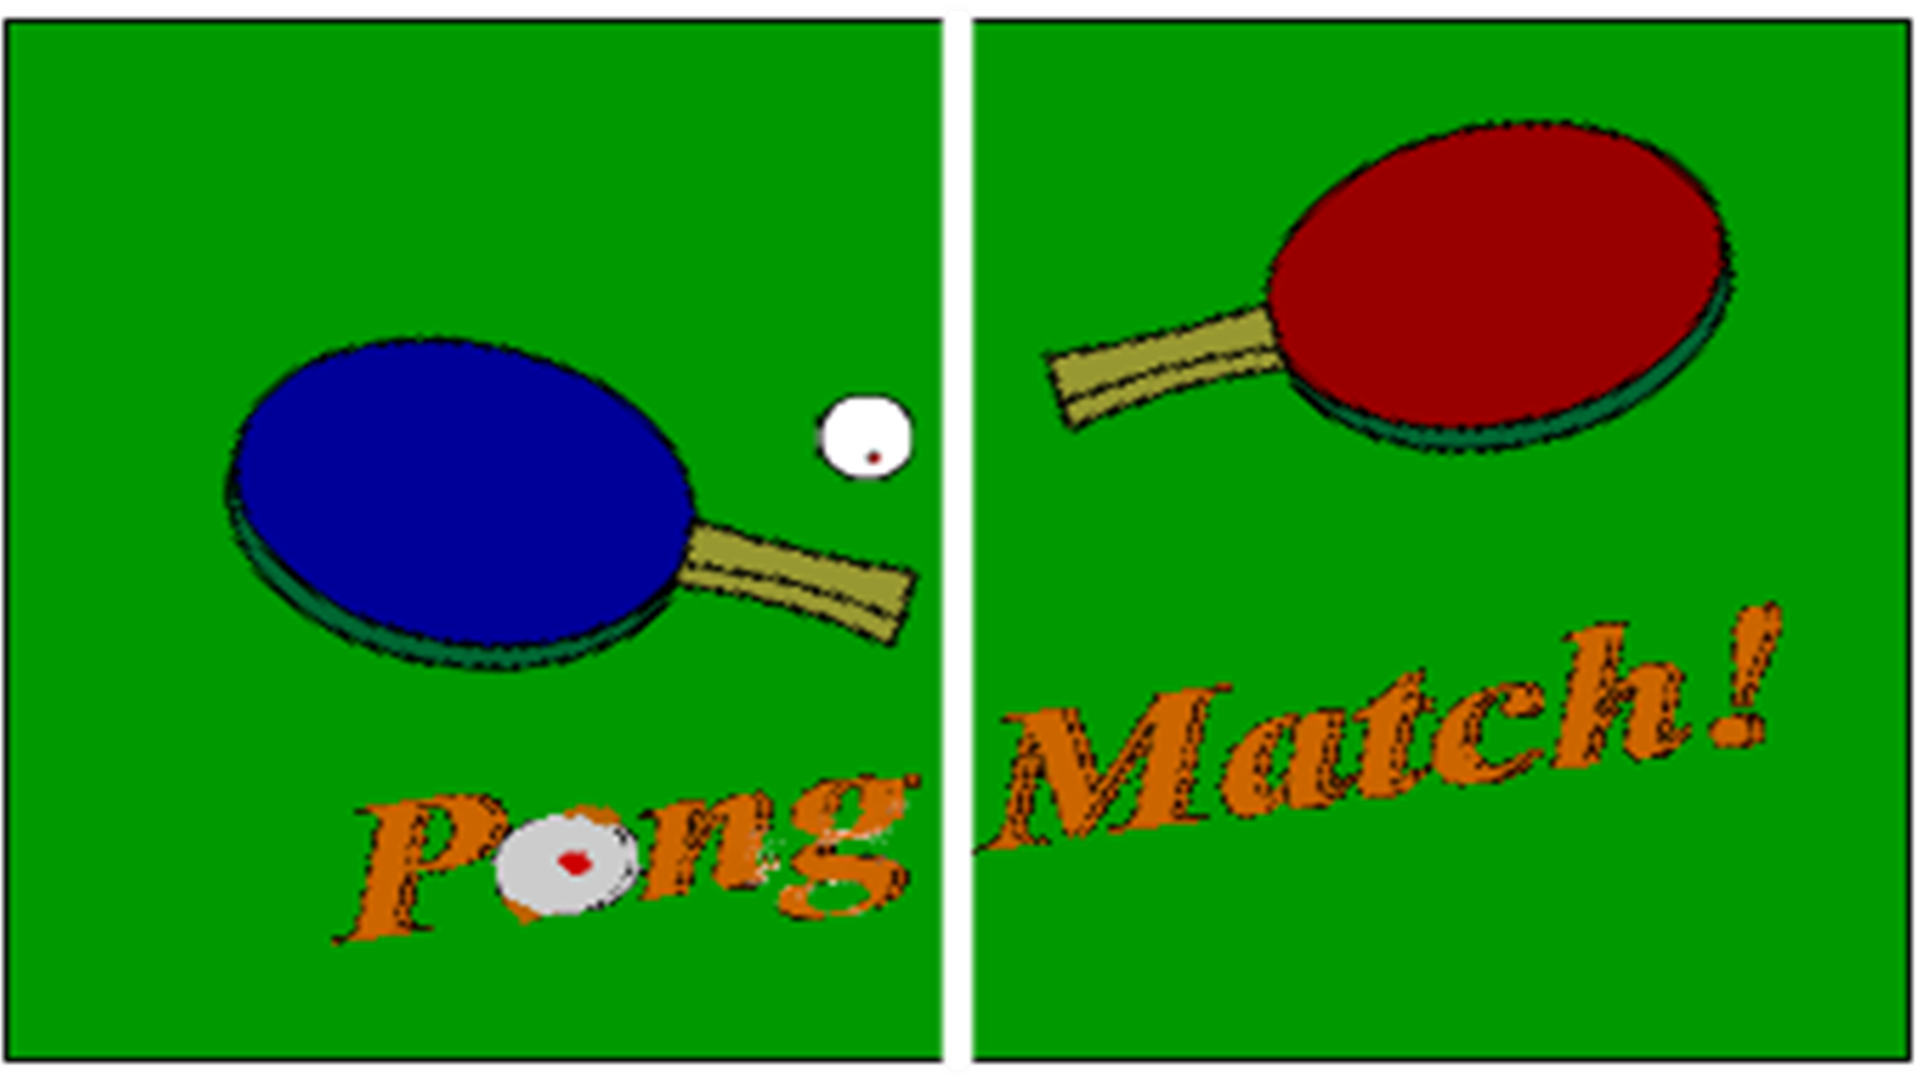 Pong 2 - Online Multiplayer Game with Offline Play